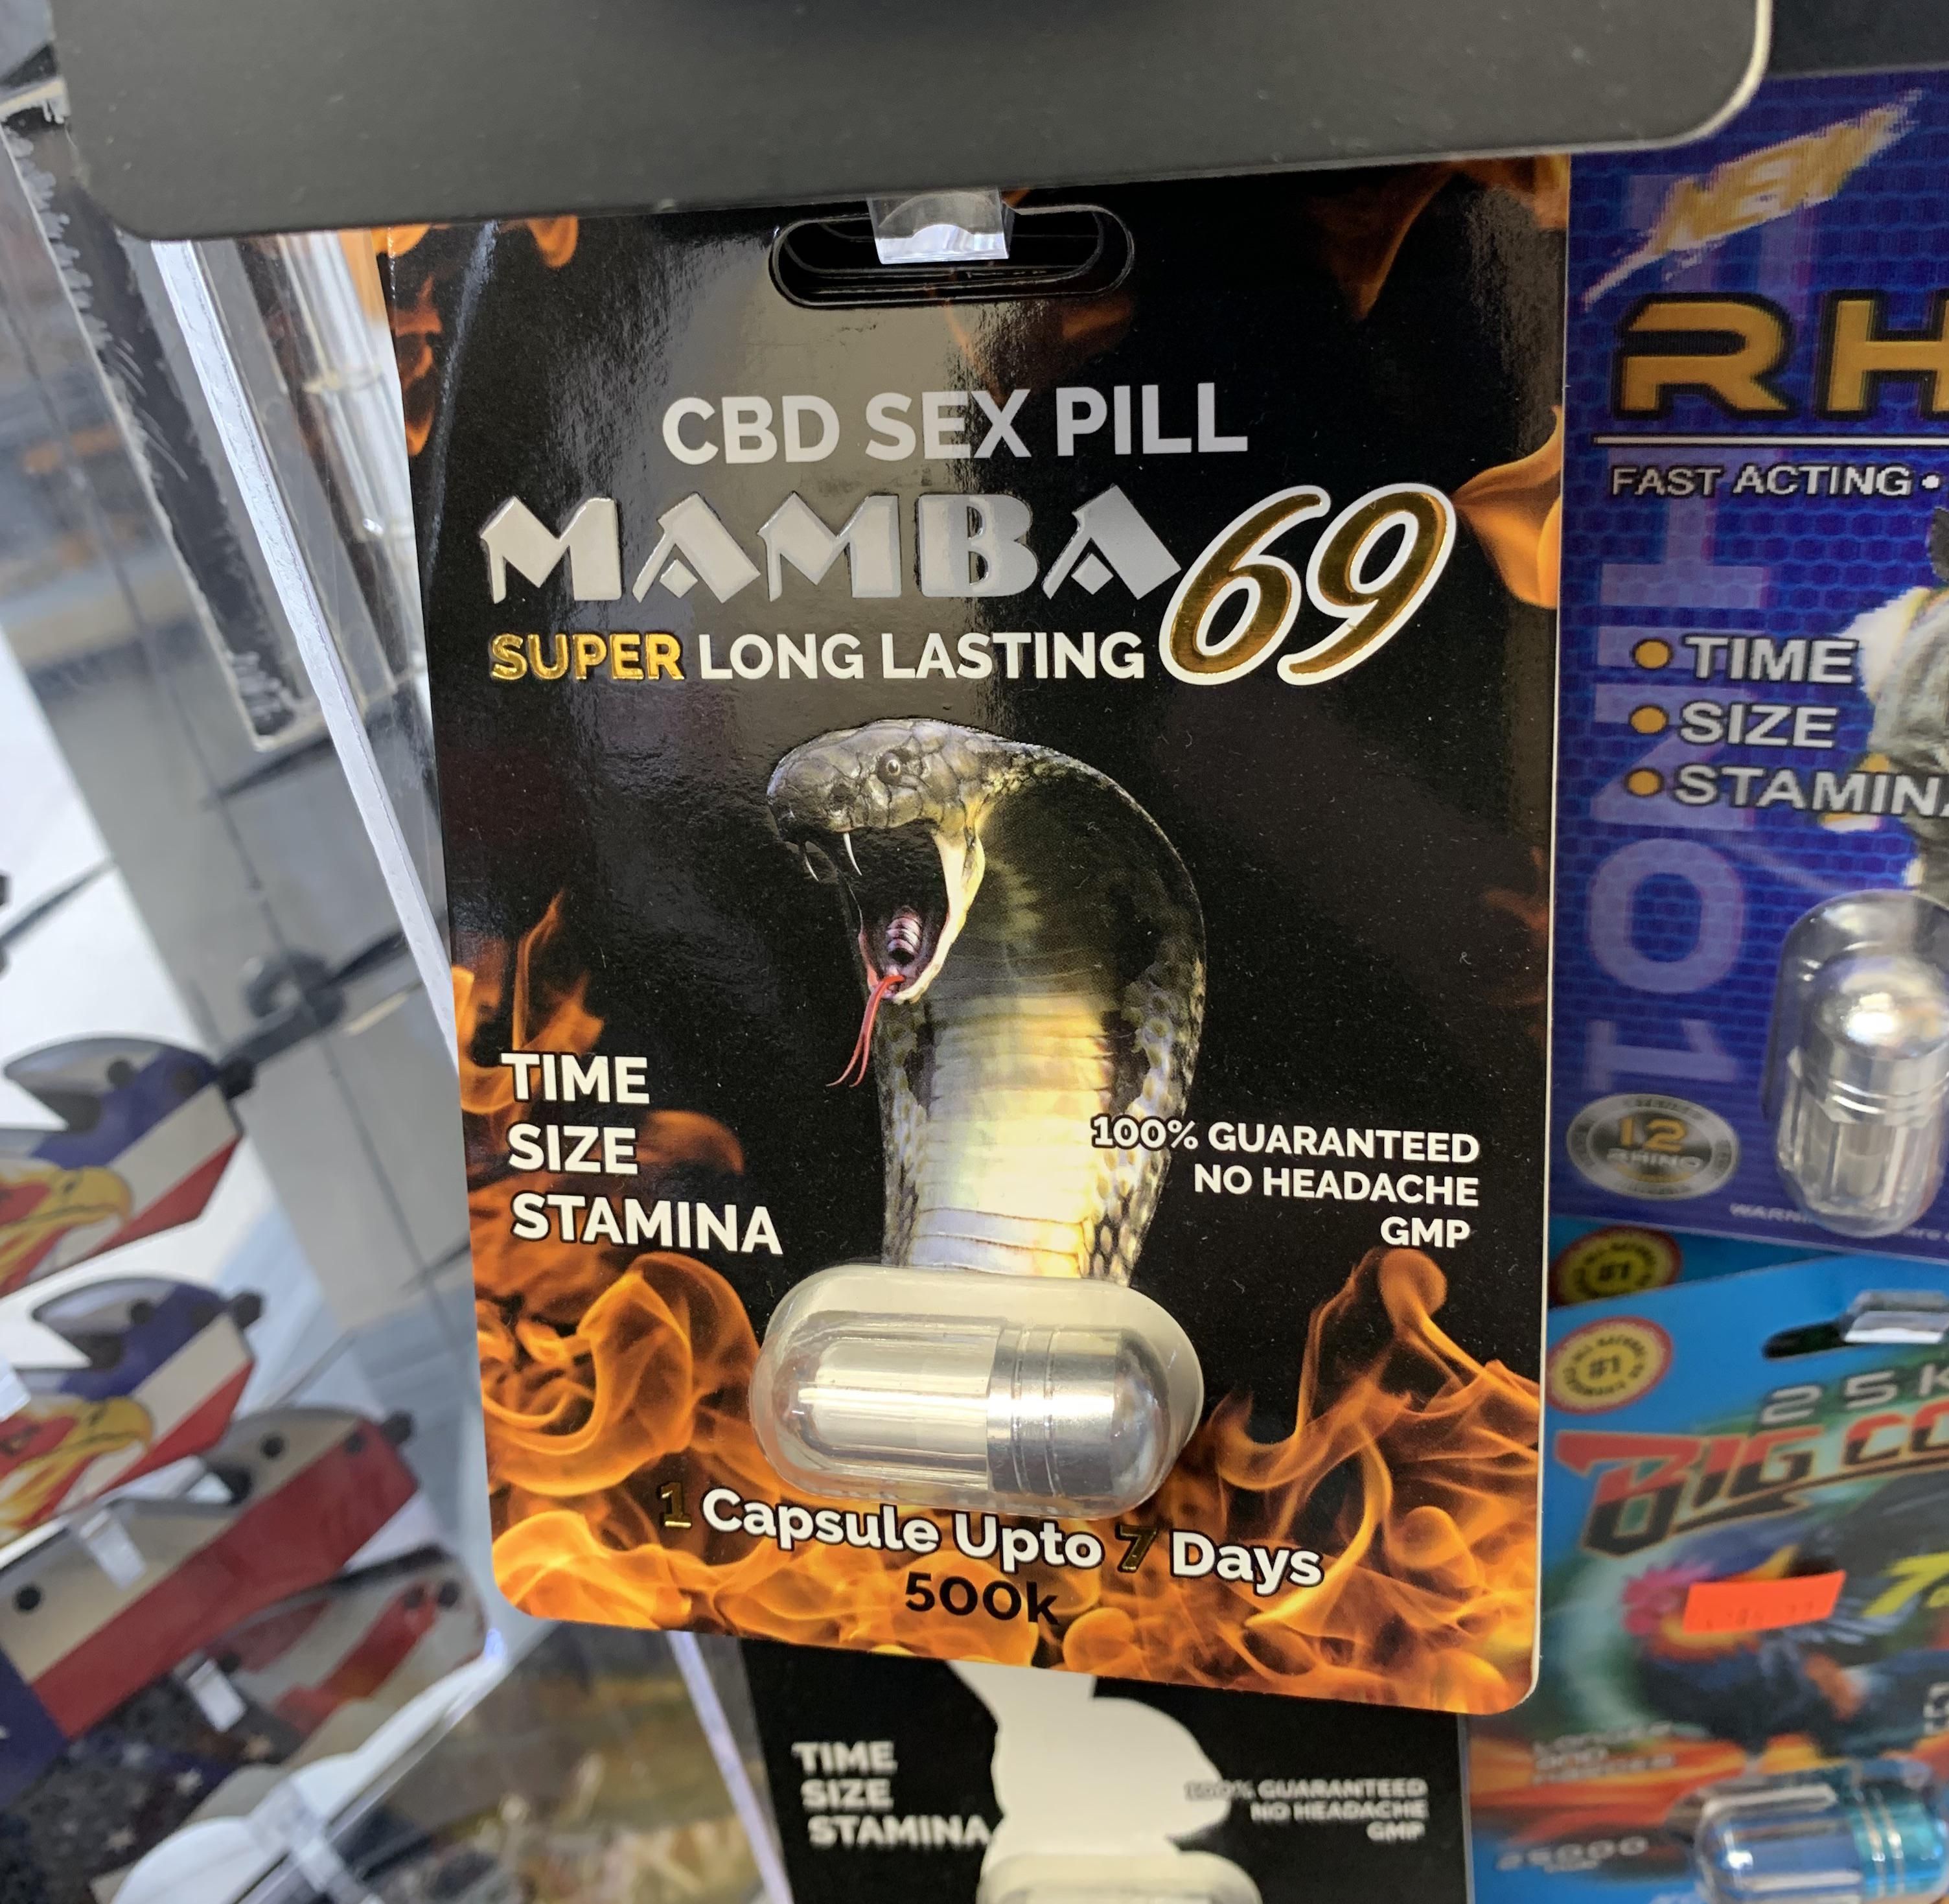 Part 6 of our ongoing series Knoxville Gas Station Enhancement Pills: Mamba Edition